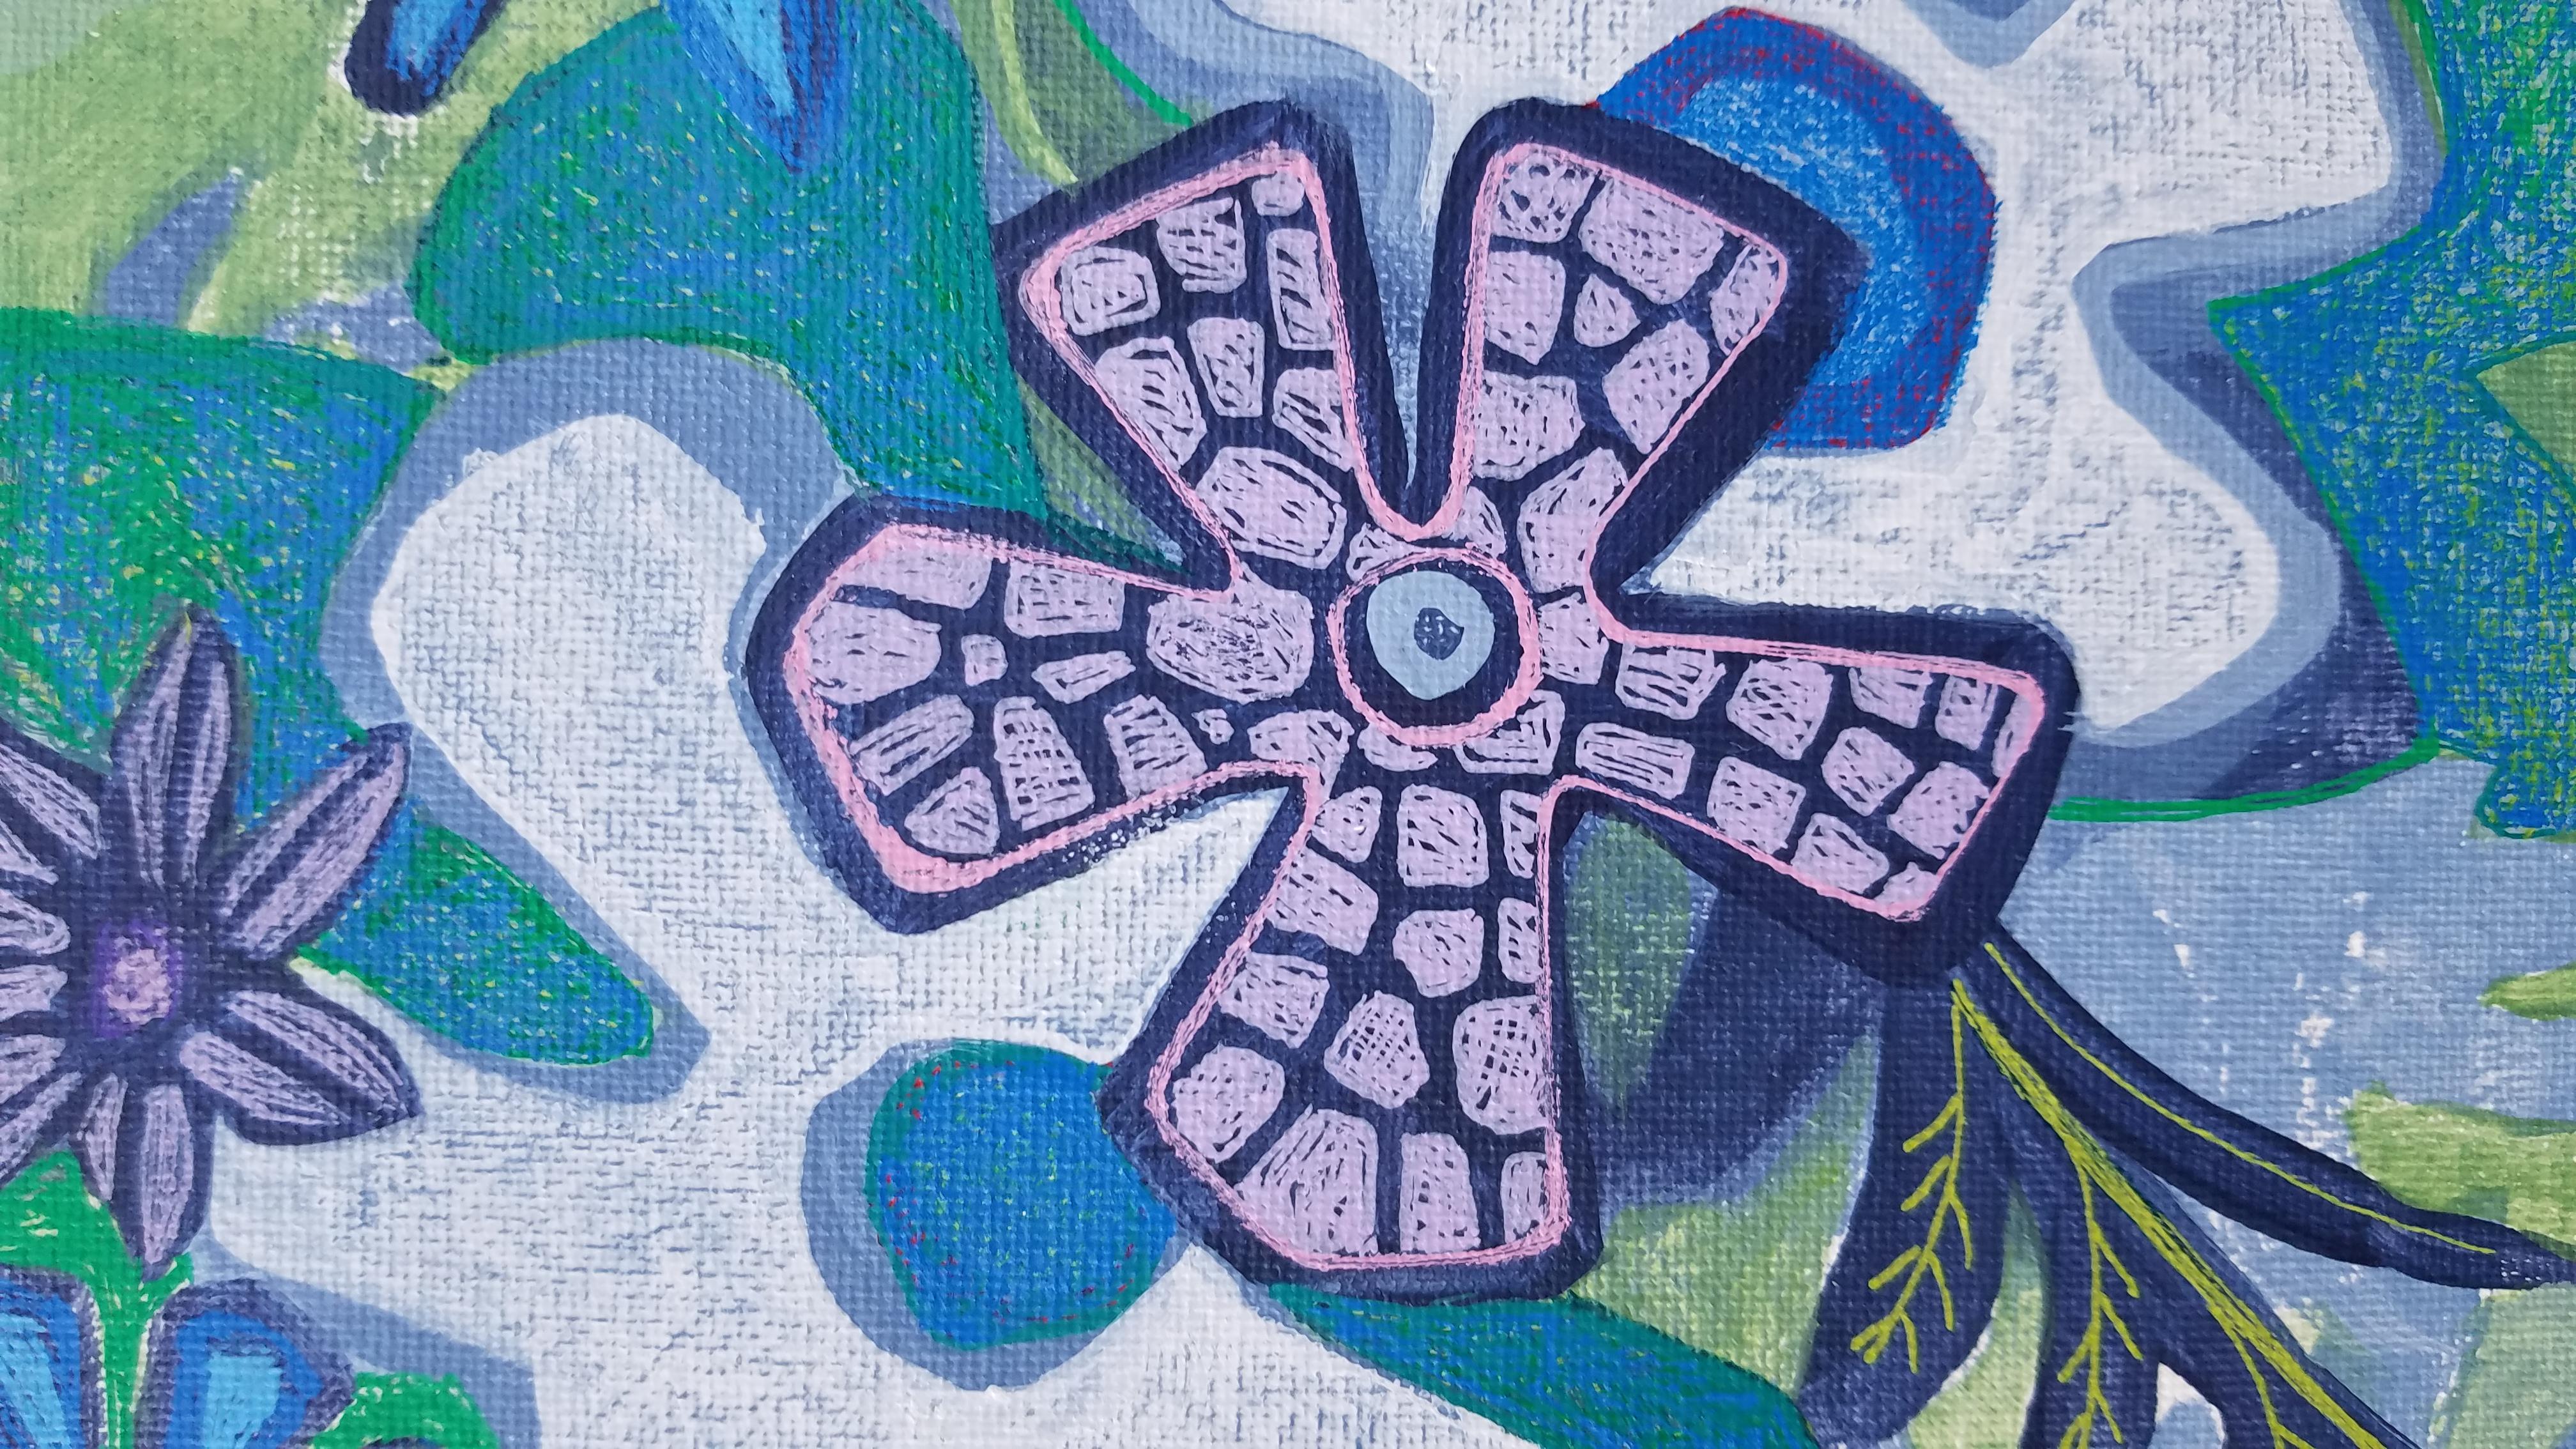 <p>Artist Comments<br />An abstract garden scene with purple, blue, and white flowers dancing on a backdrop of fresh greens. Part of a series of small-scale works inspired by the bright colors and lively motifs of spring.</p><br /><p>About the